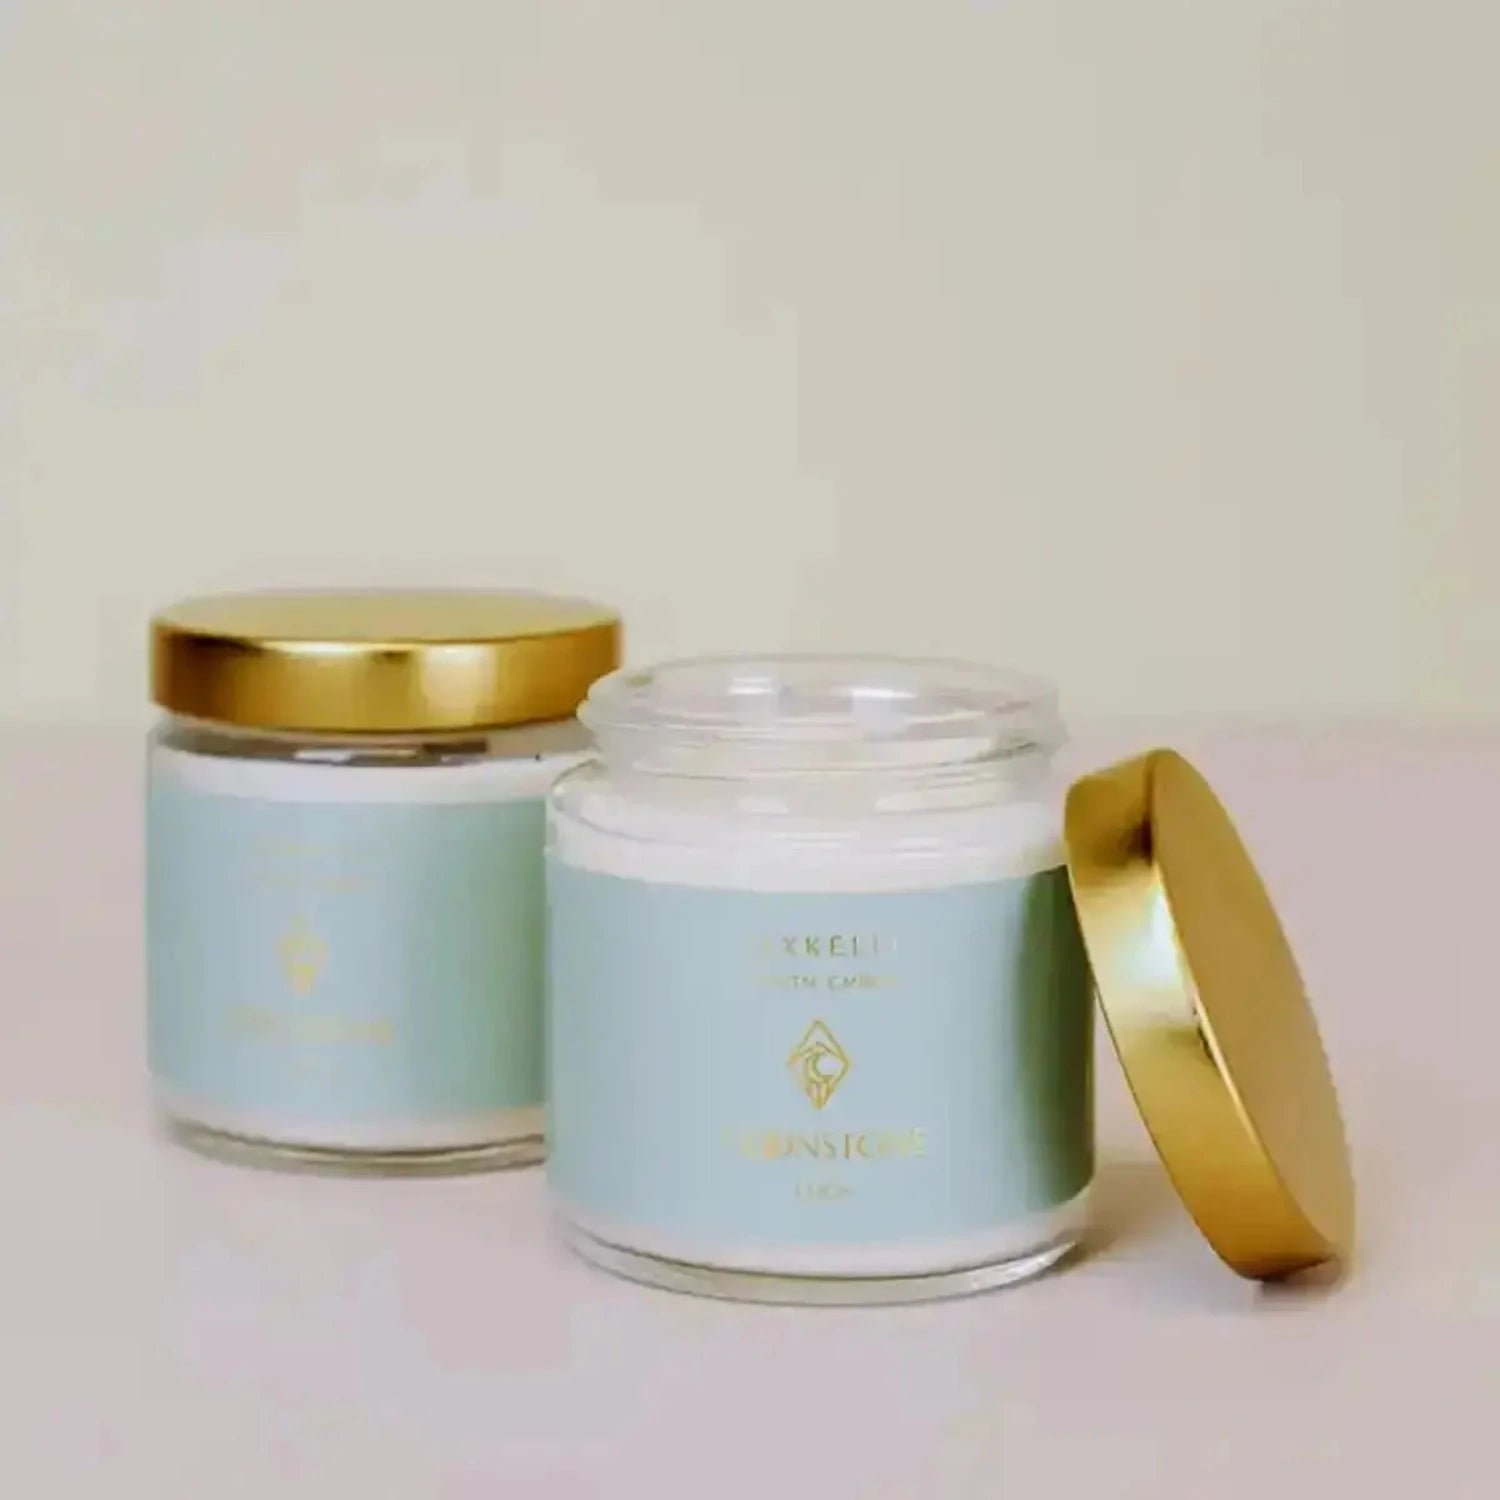 two jars of Jax Kelly candles sitting next to each other